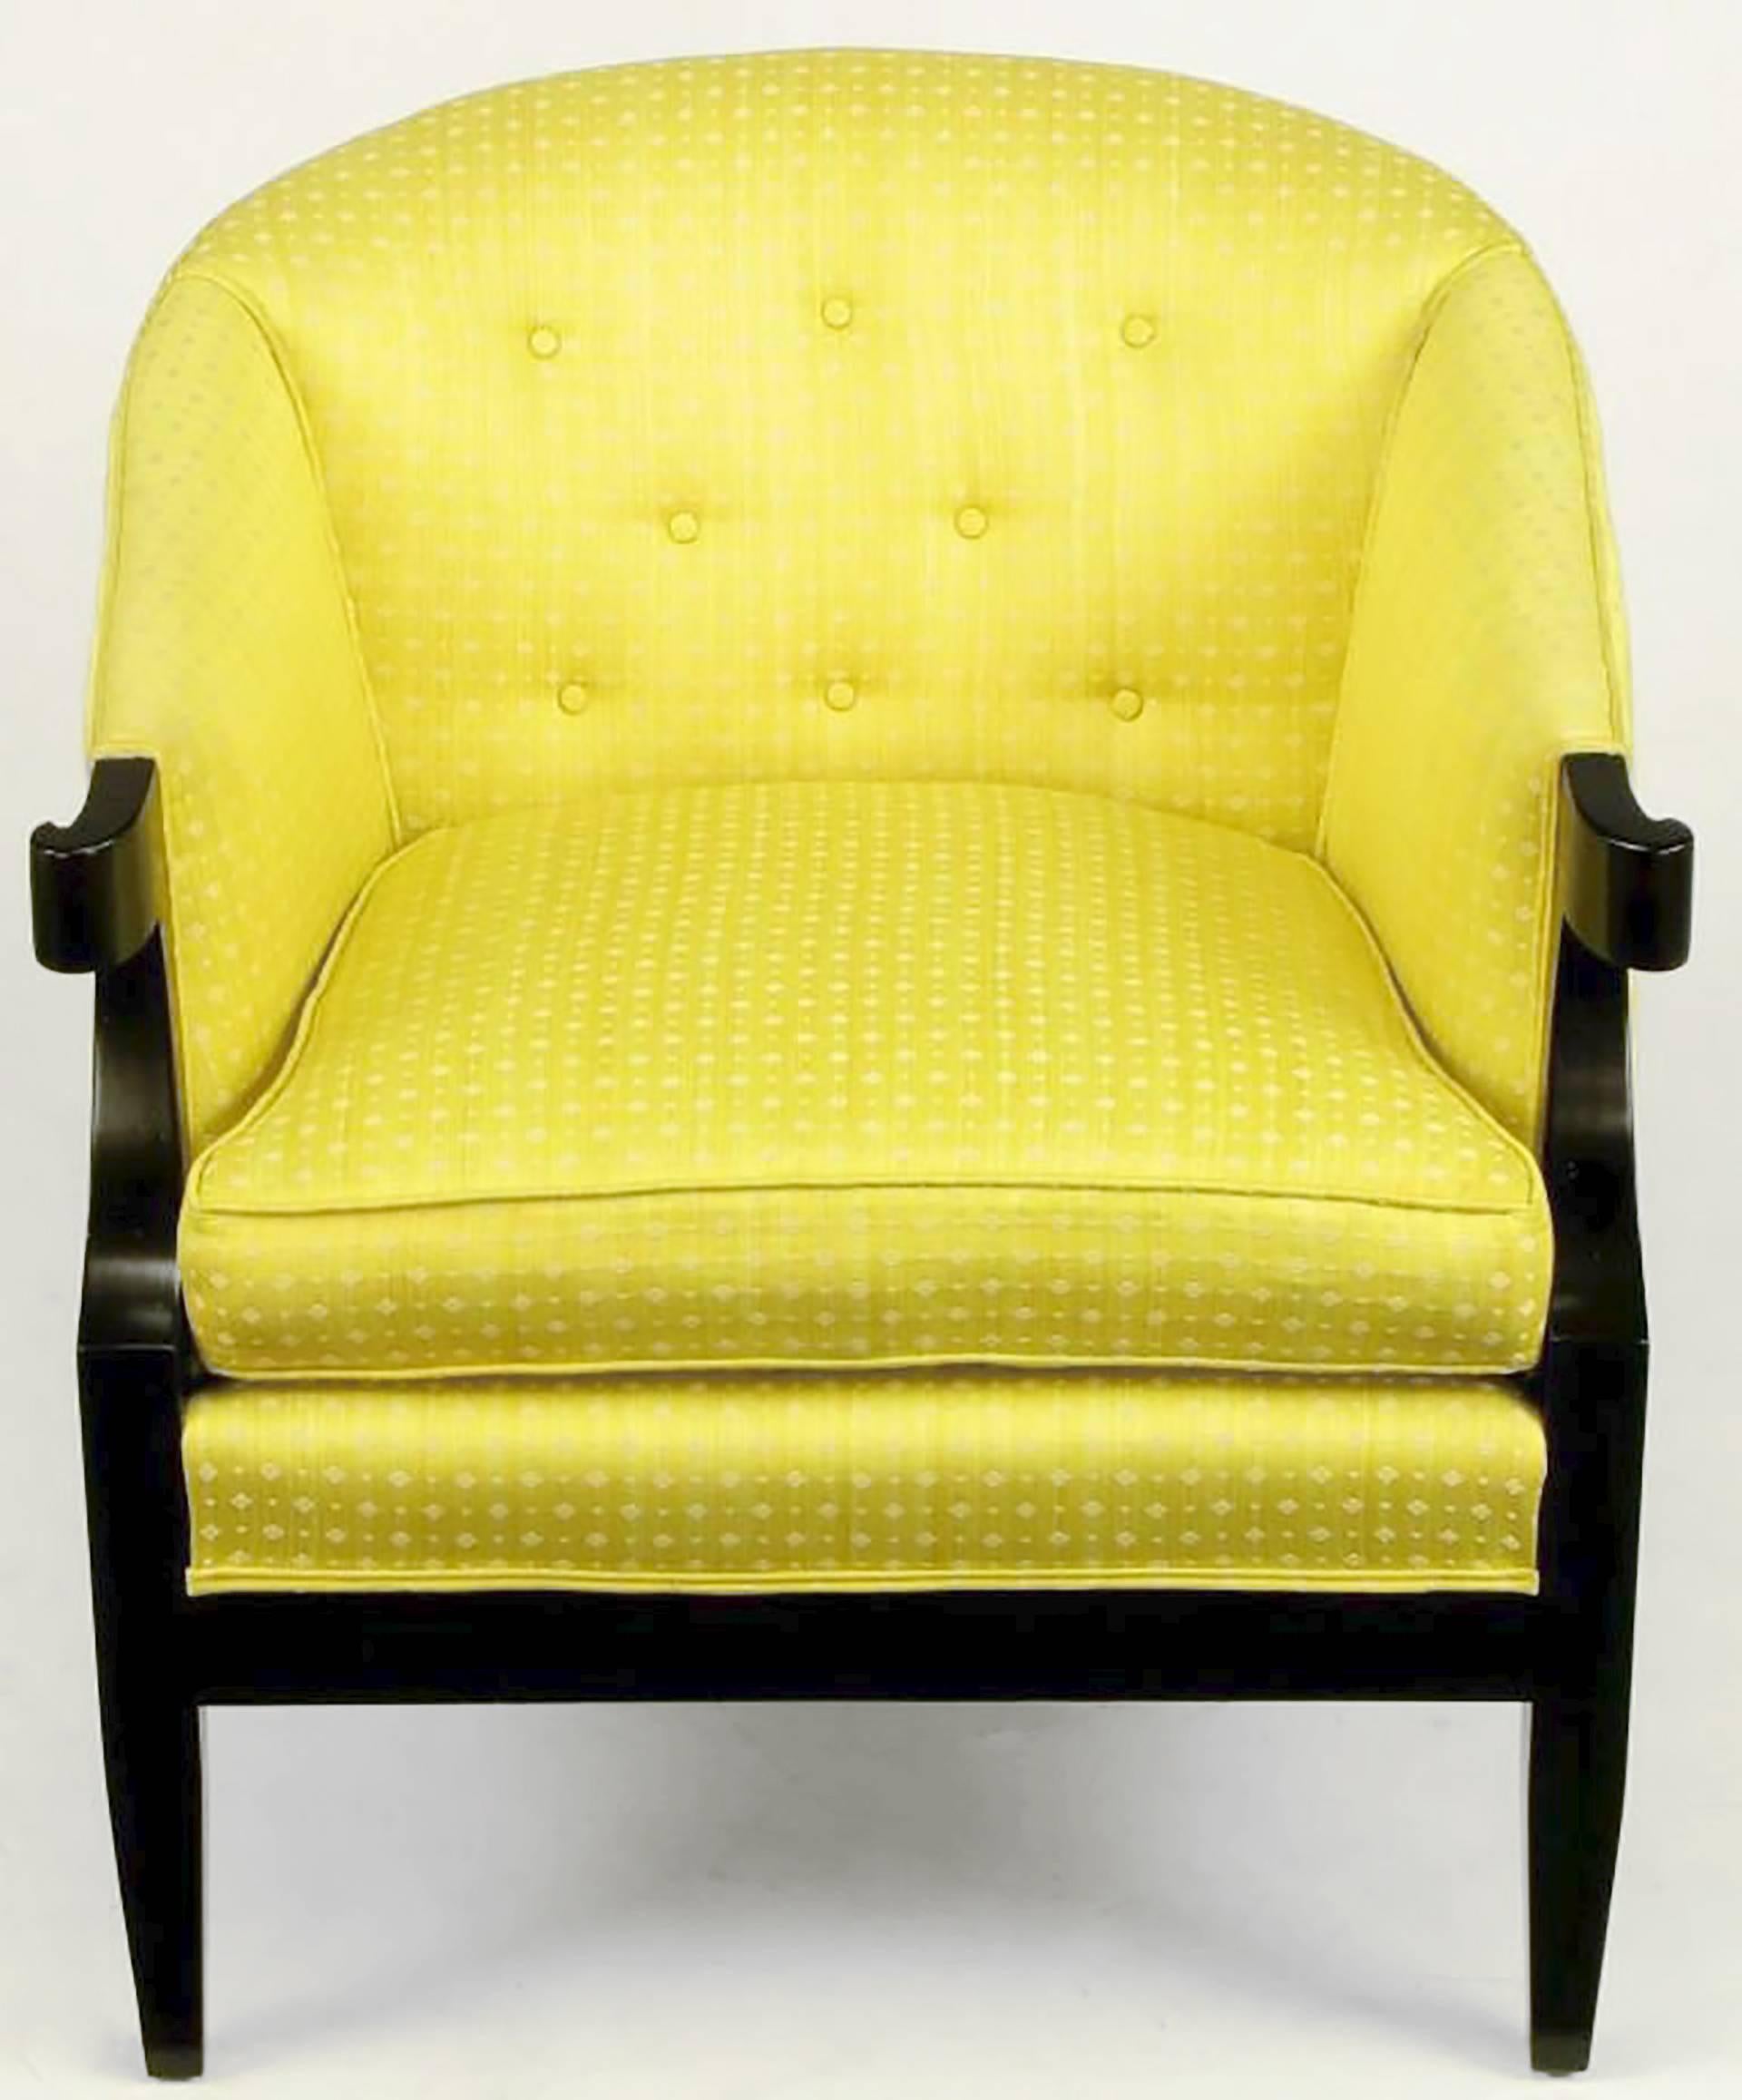 Designed by Winsor White and William Millington for Baker's 1954 Continental collection, these armchairs are upholstered in a vintage yellow embroidered silk fabric, with refinished ebonized walnut frames with turned arms and tapered front and back